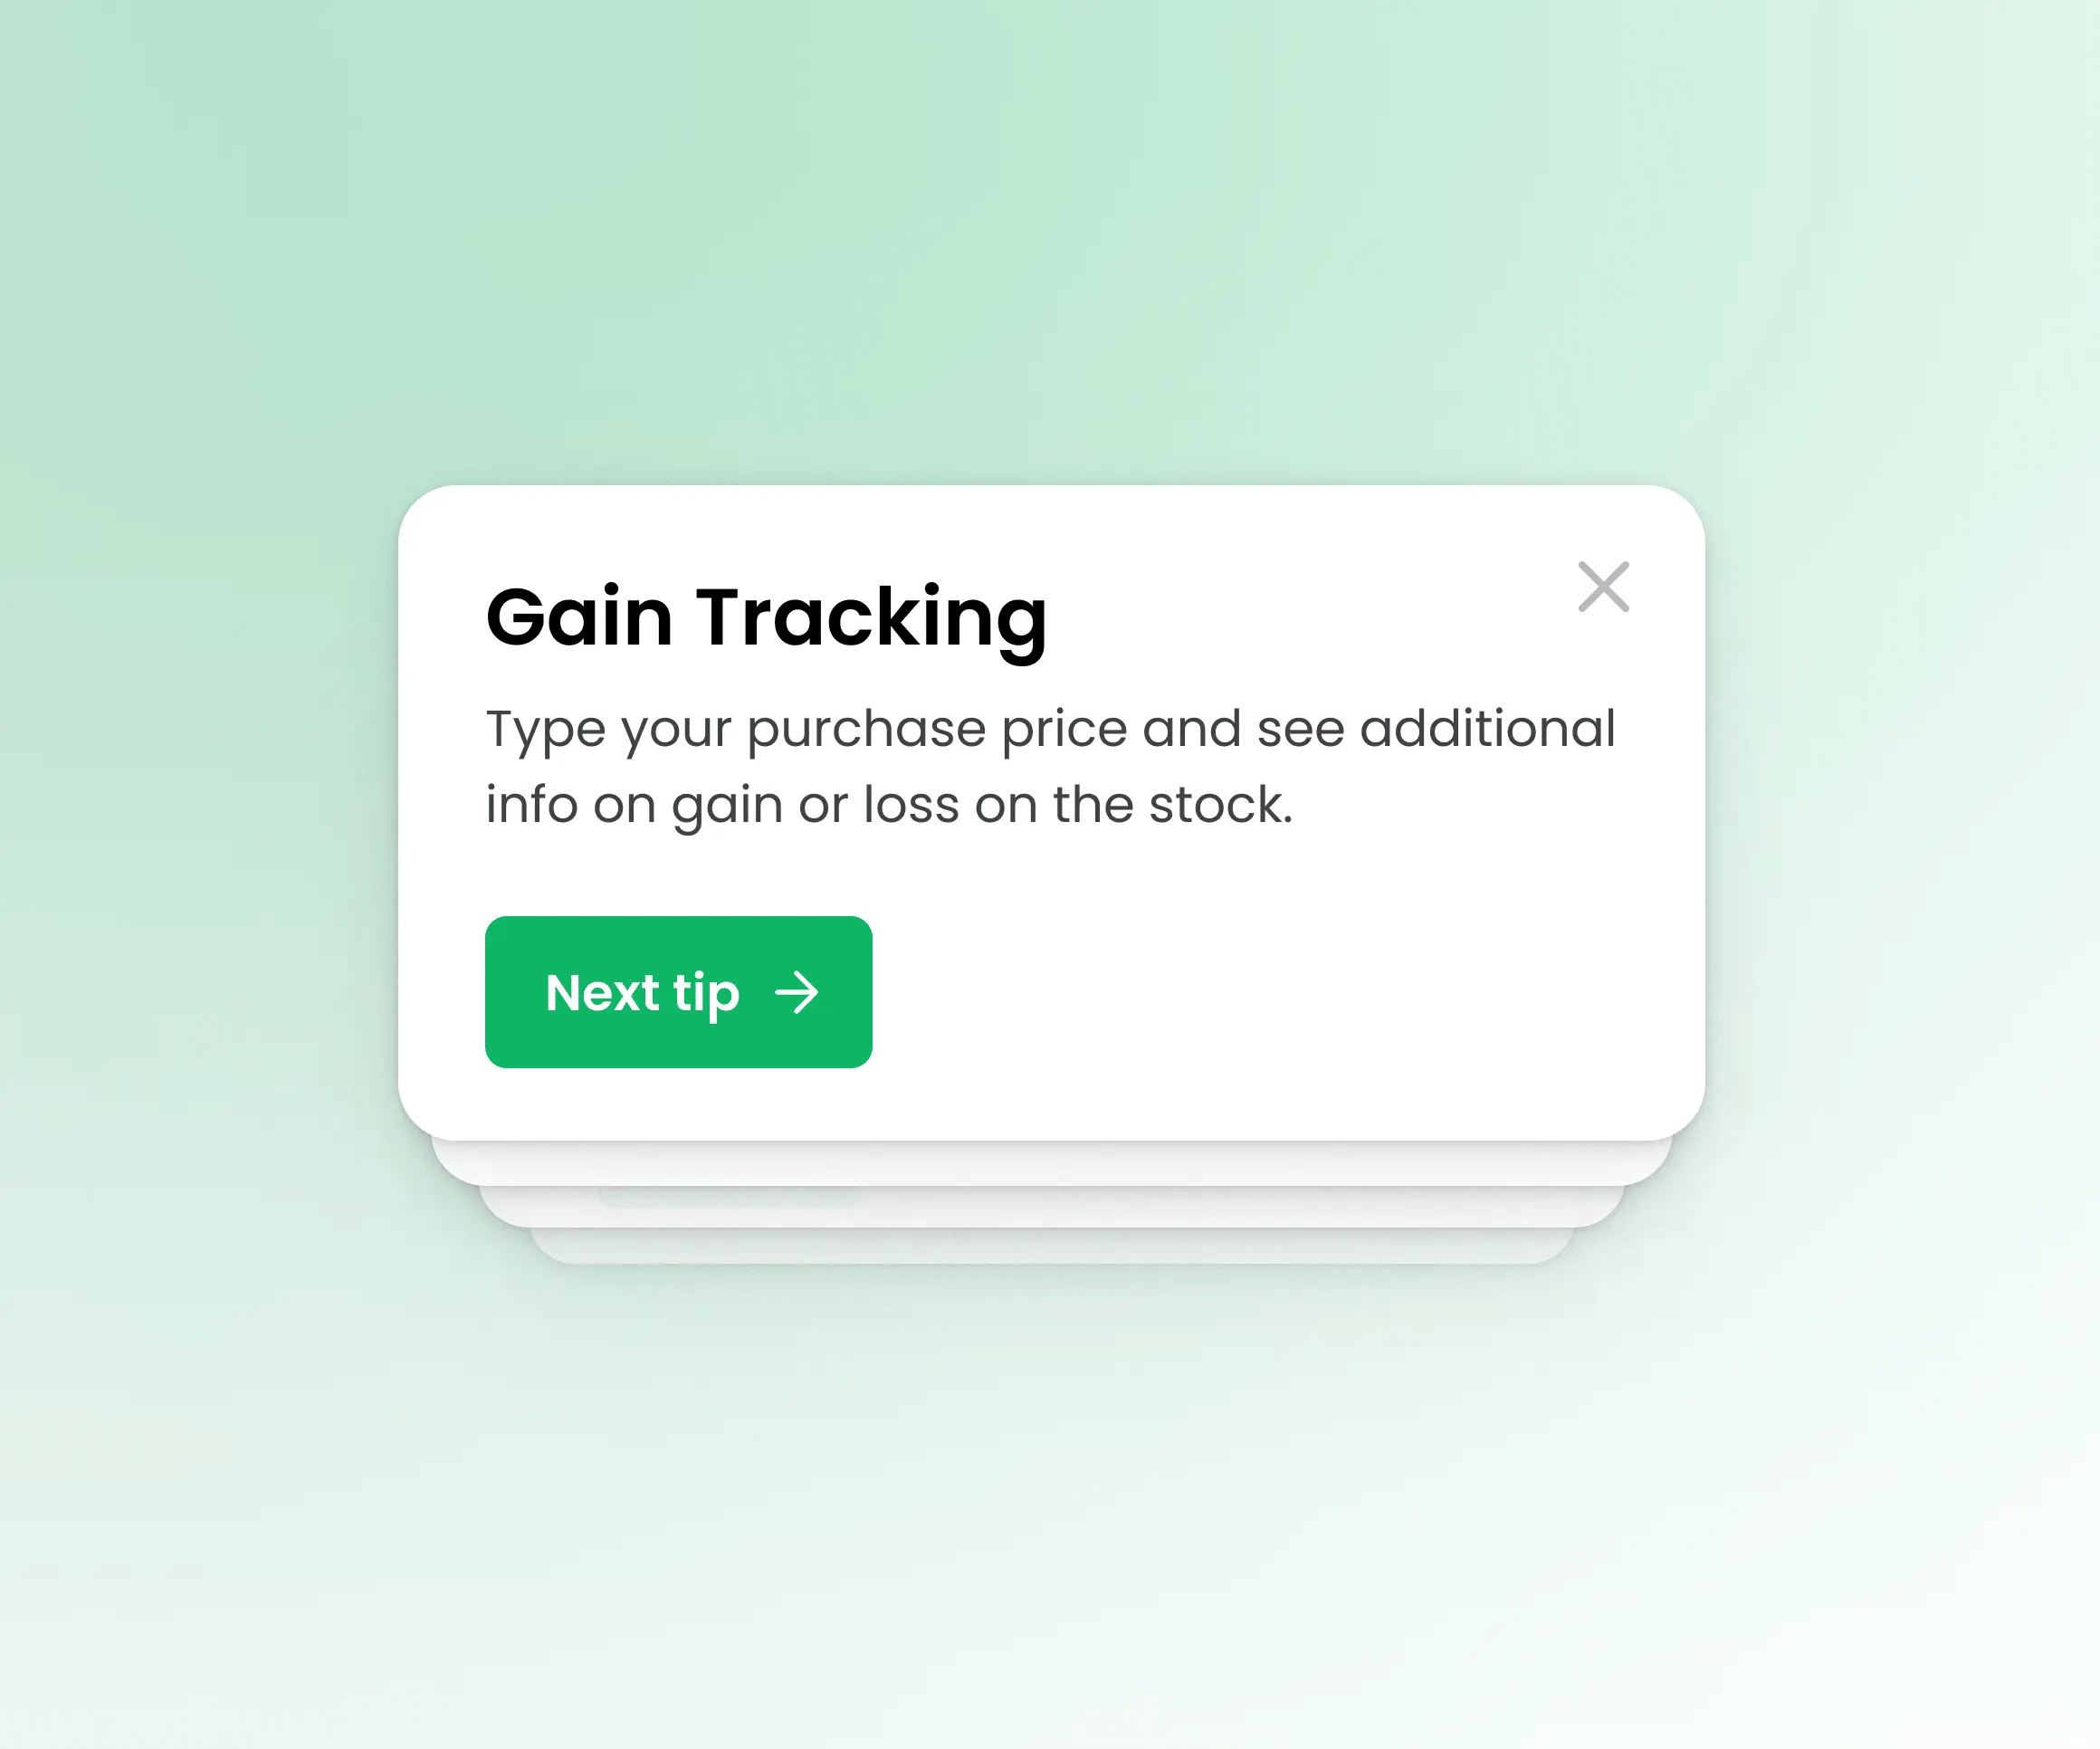 Tips in the onboarding flow from the TickrMeter website on faded green background